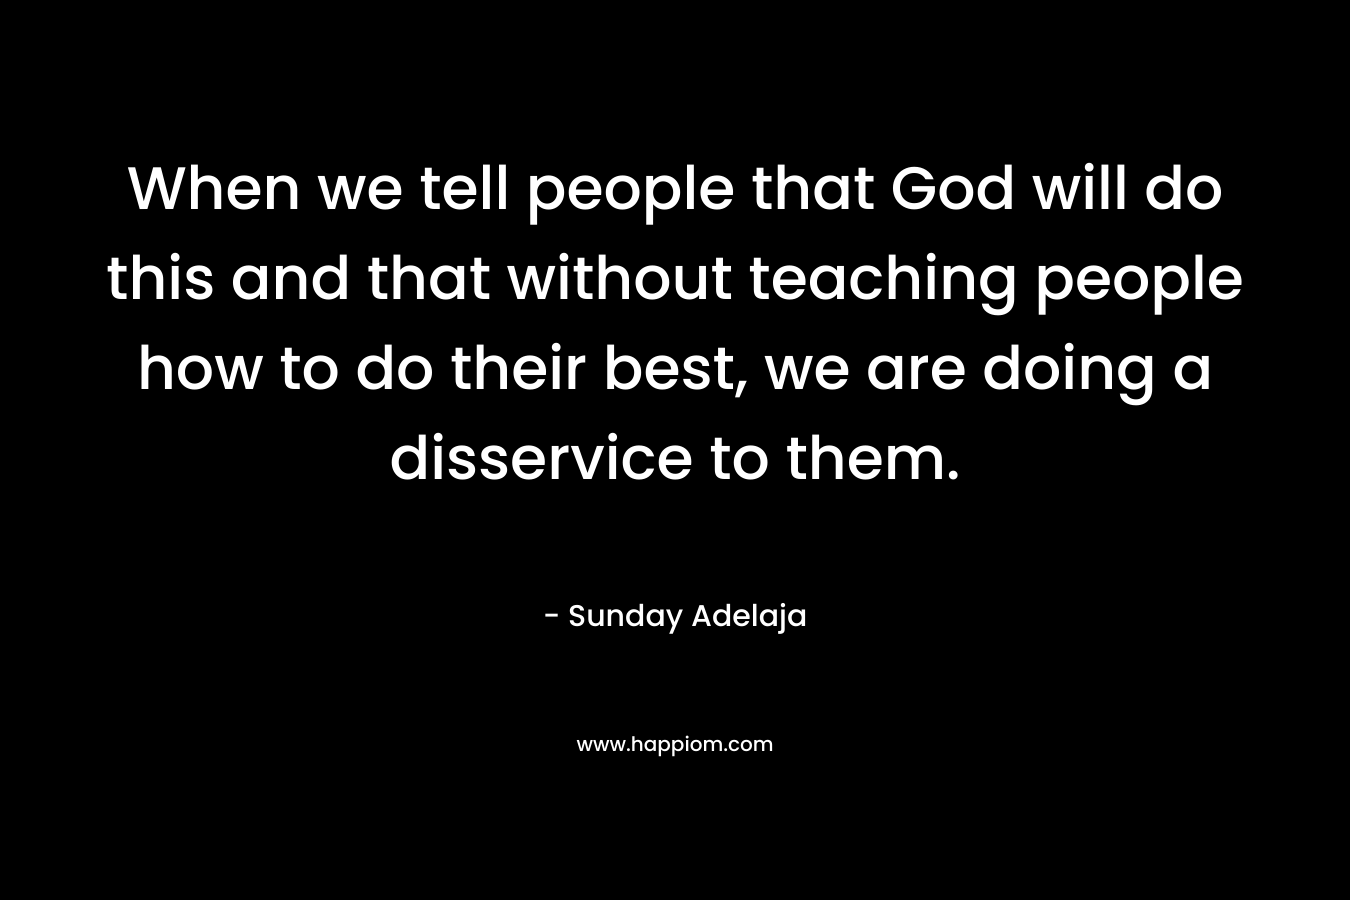 When we tell people that God will do this and that without teaching people how to do their best, we are doing a disservice to them. – Sunday Adelaja